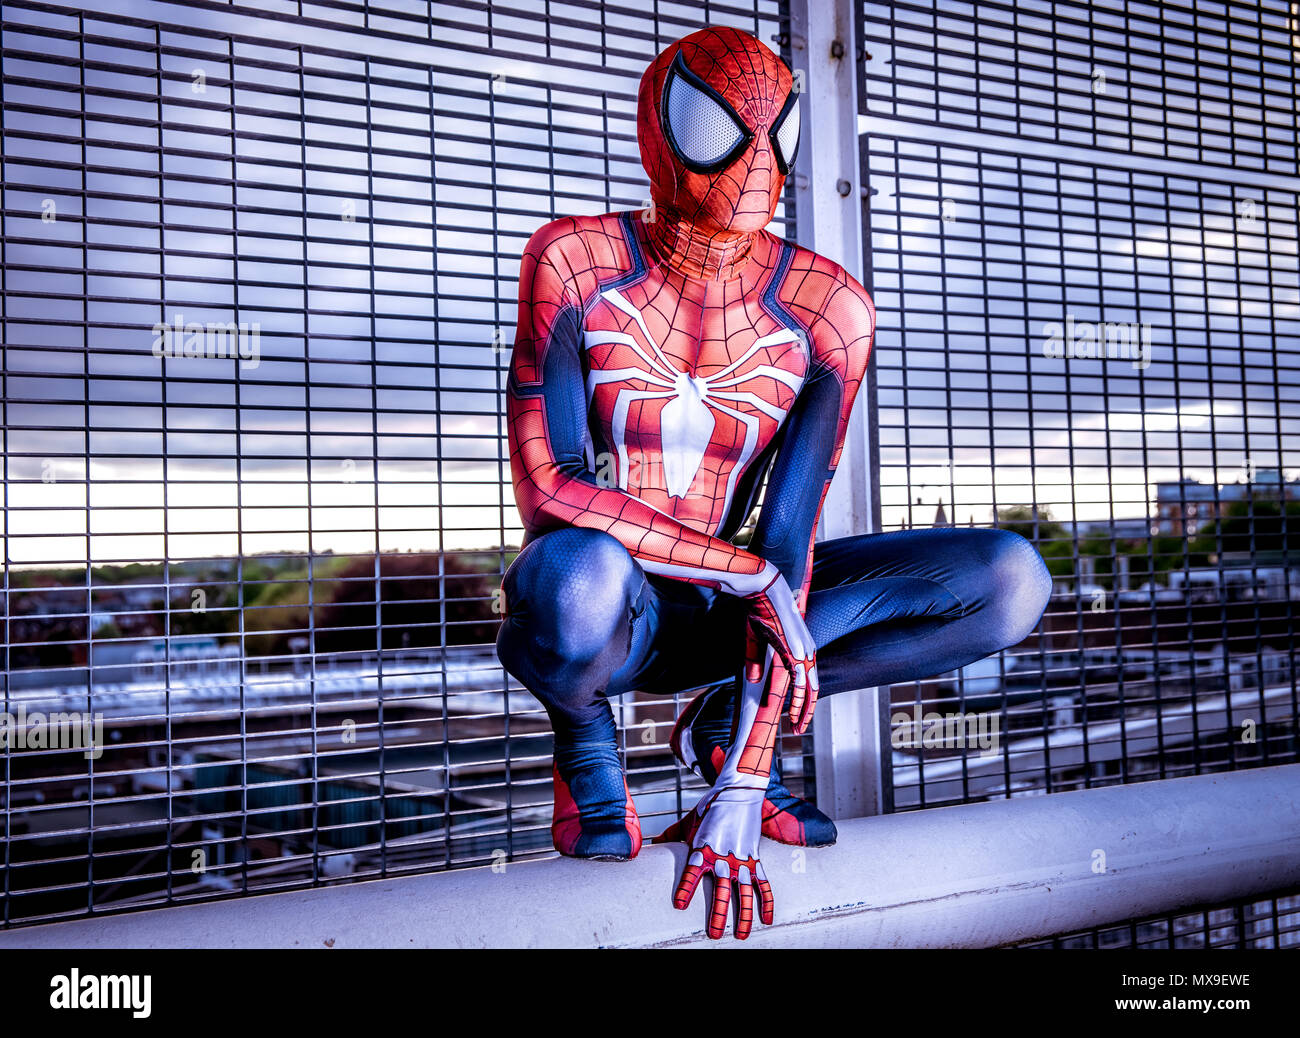 Cosplayeuse Spiderman spiderman dans son costume. Banque D'Images